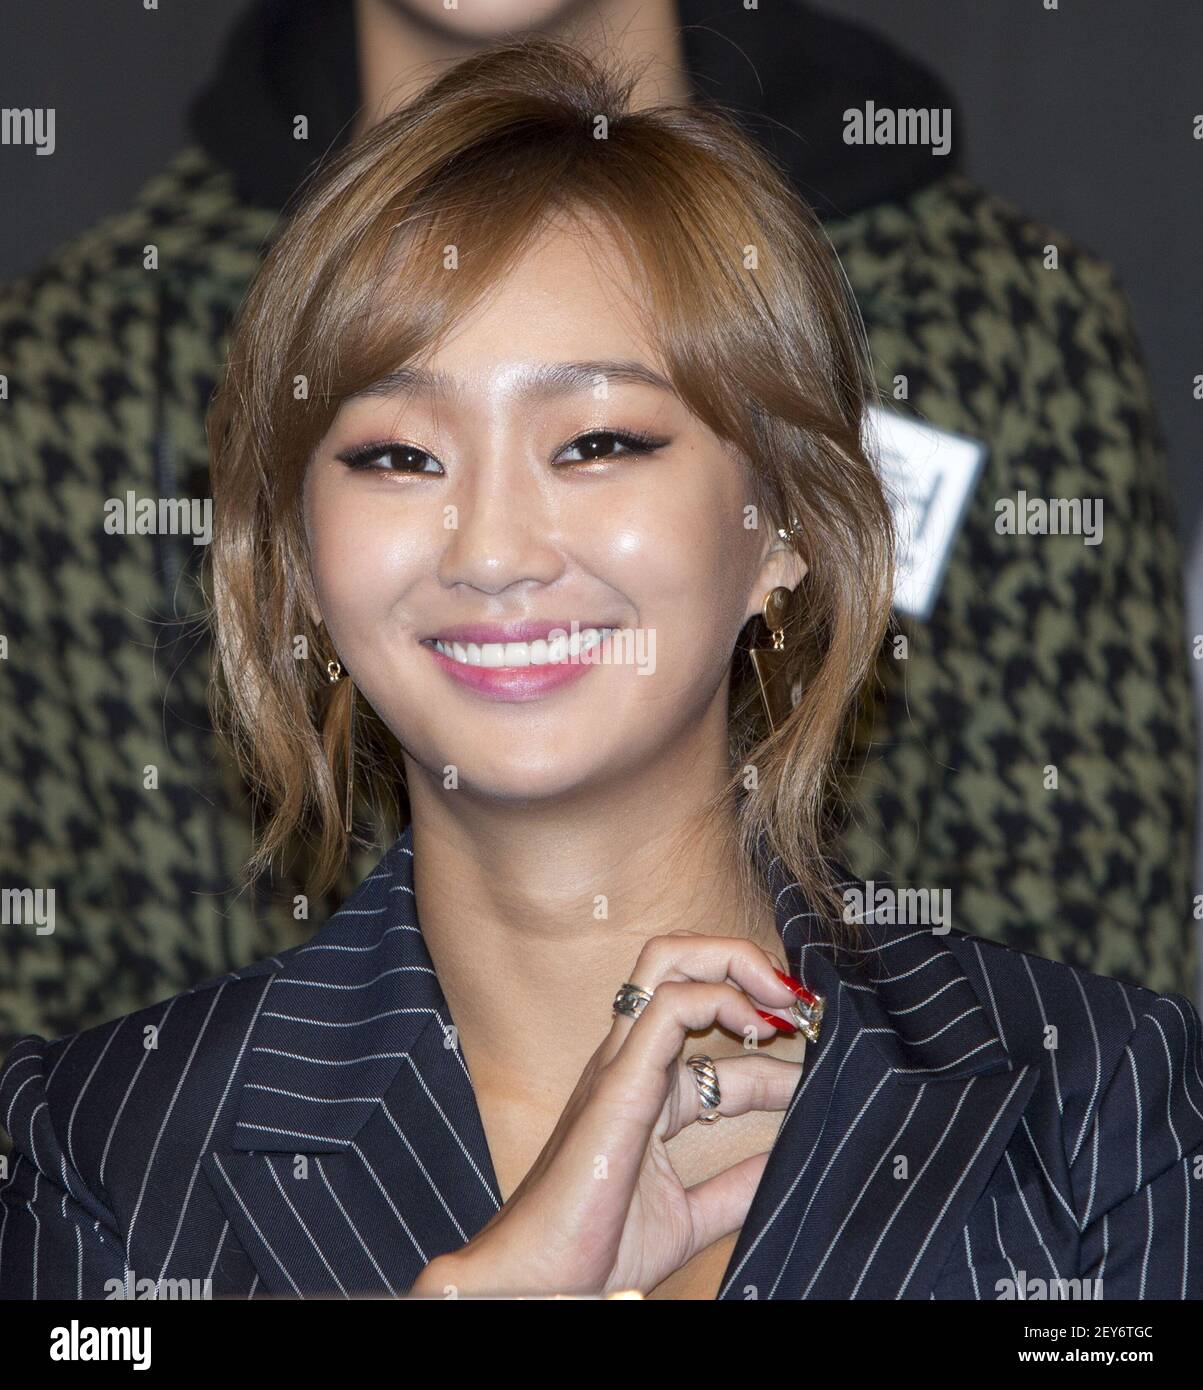 8 December 2014 - Seoul, South Korea : South Korean K-Pop girl group Sistar member Hyo Rin, attends a photo call for the Mnet Wednesday new drama K-Pop upcoming first episode of 'NO.MERCY' a survival audition program with Starship Entertainment trainees during a premiere in Seoul, South Korea on December 8, 2014. The upcoming drama will be broadcasted starting from on December 10. Photo Credit: Lee Young-ho/Sipa USA Stock Photo